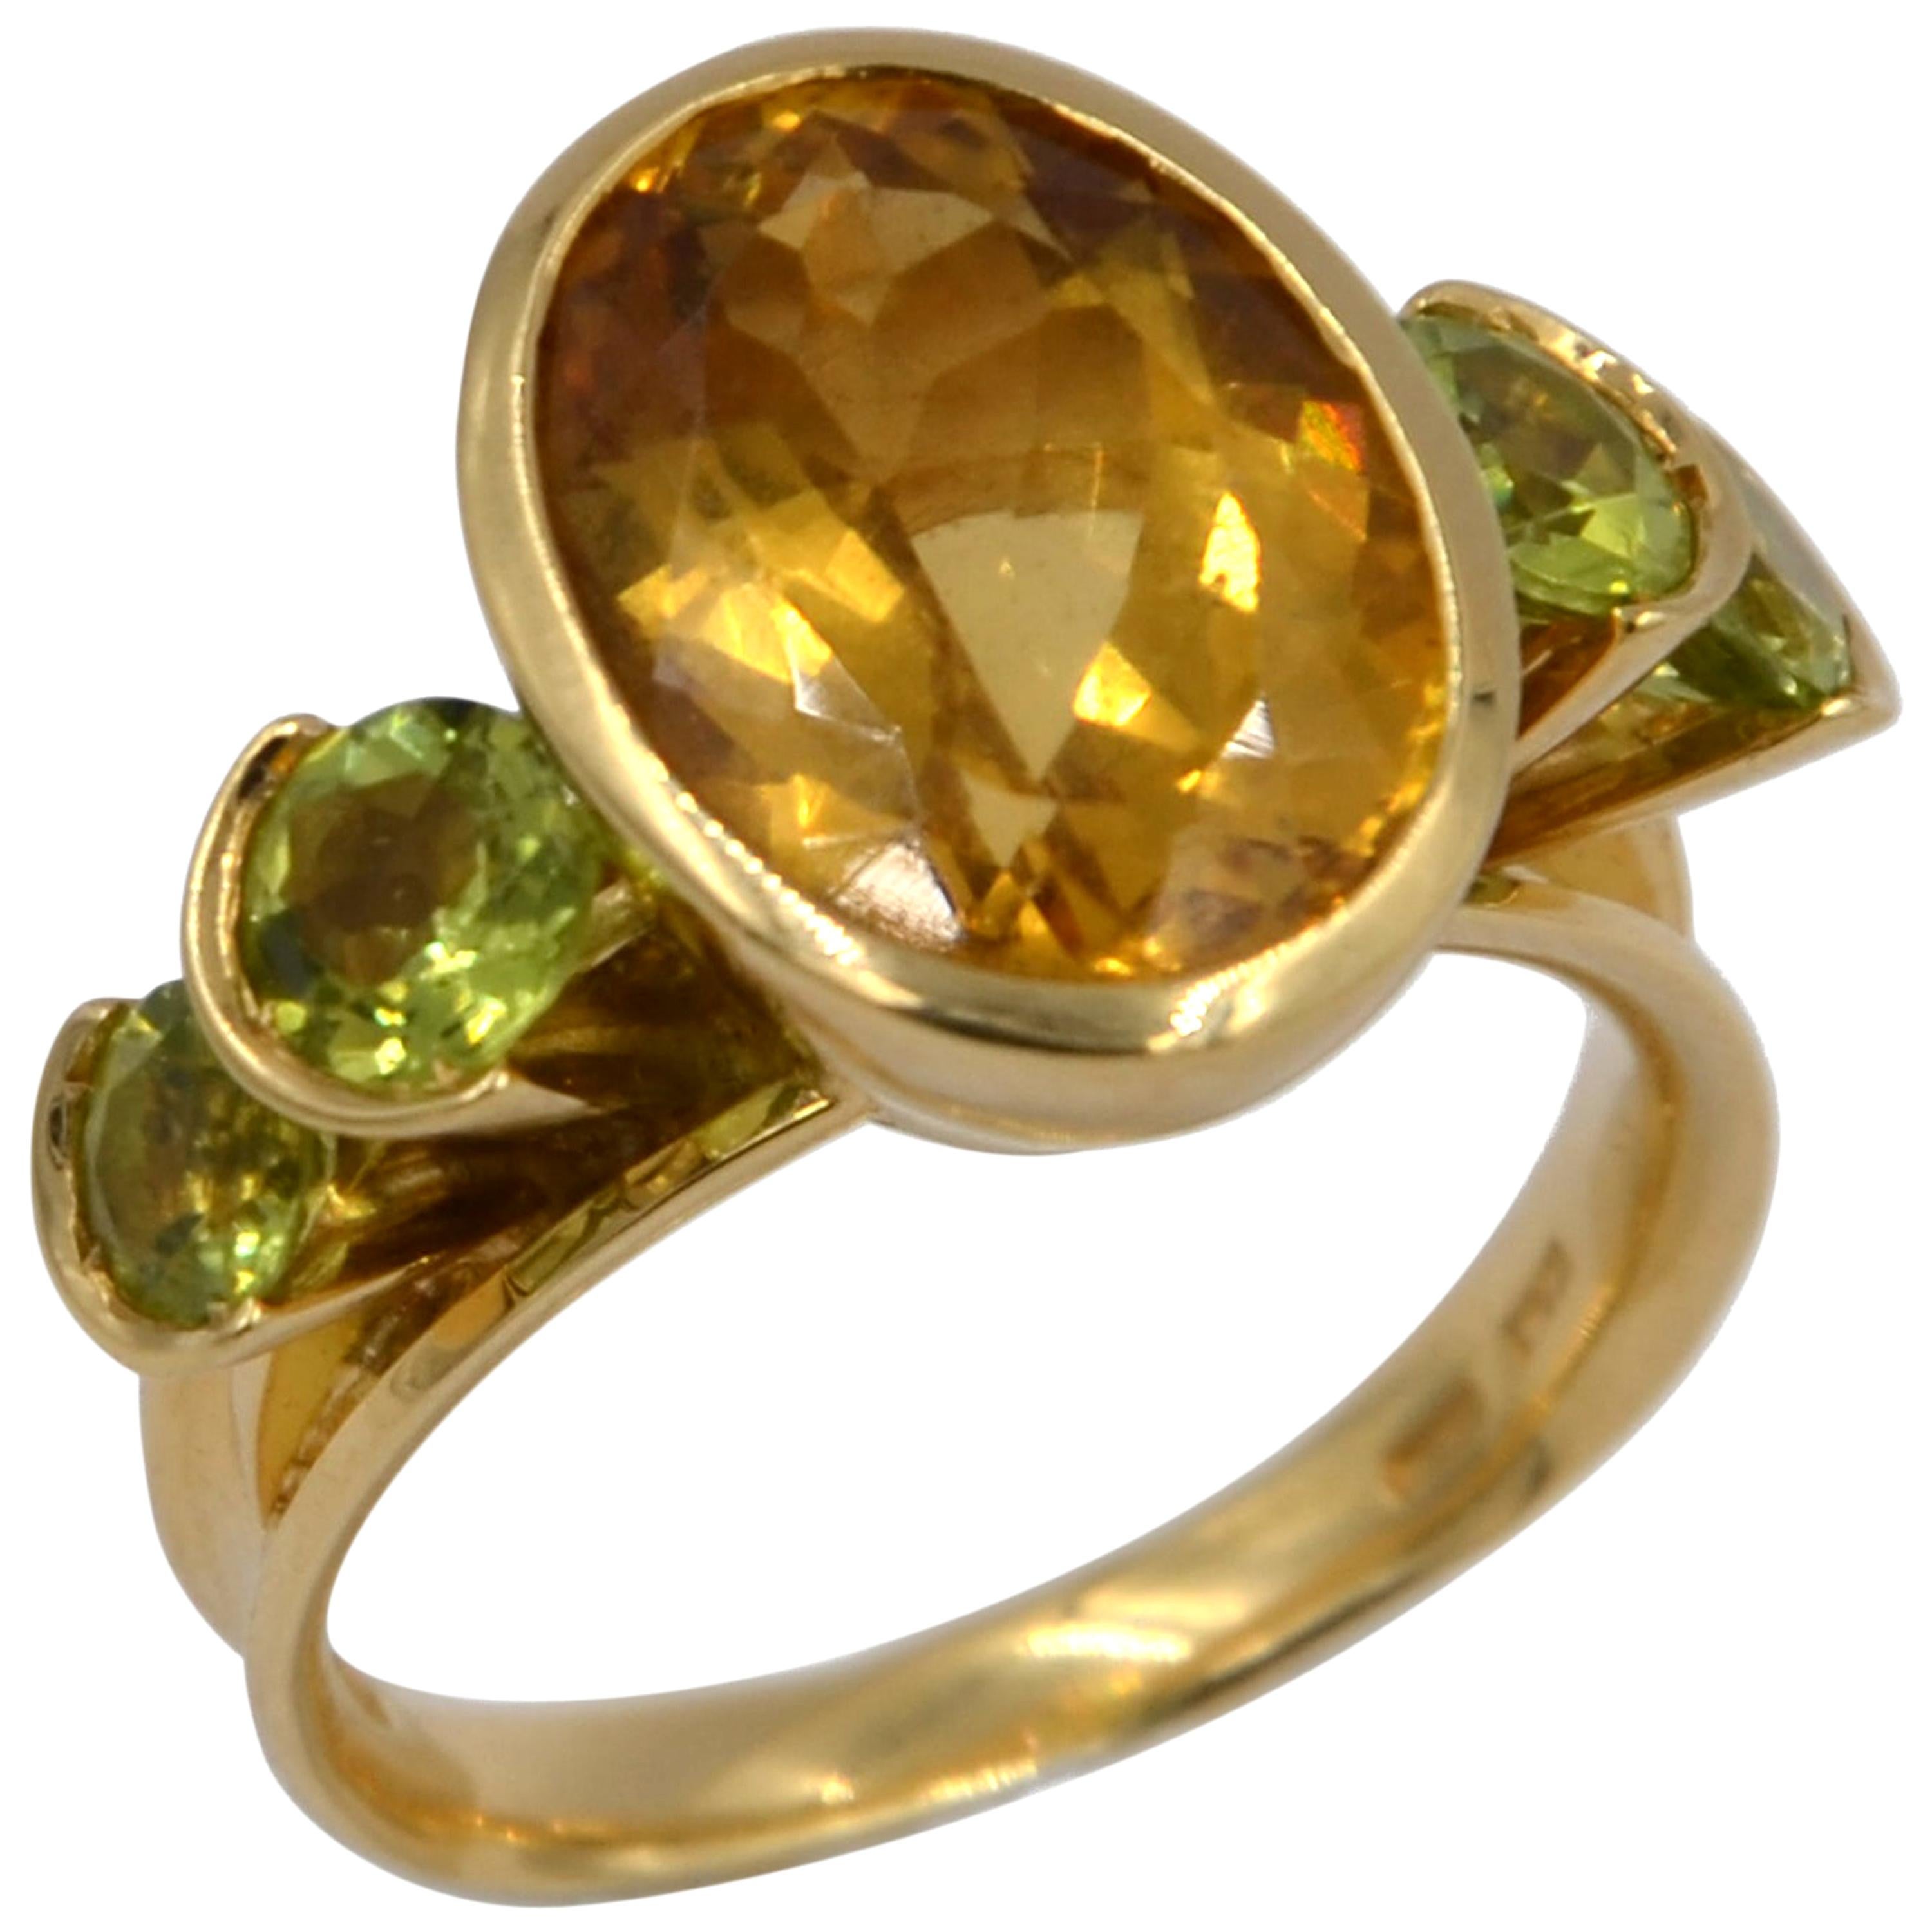 18KT Yellow Gold Peridot and Citrine Garavelli RING  Finger size 57.5 
Made in Italy
18 kt GOLD gr : 10.47
Peridot and Citrine ct 9.70
